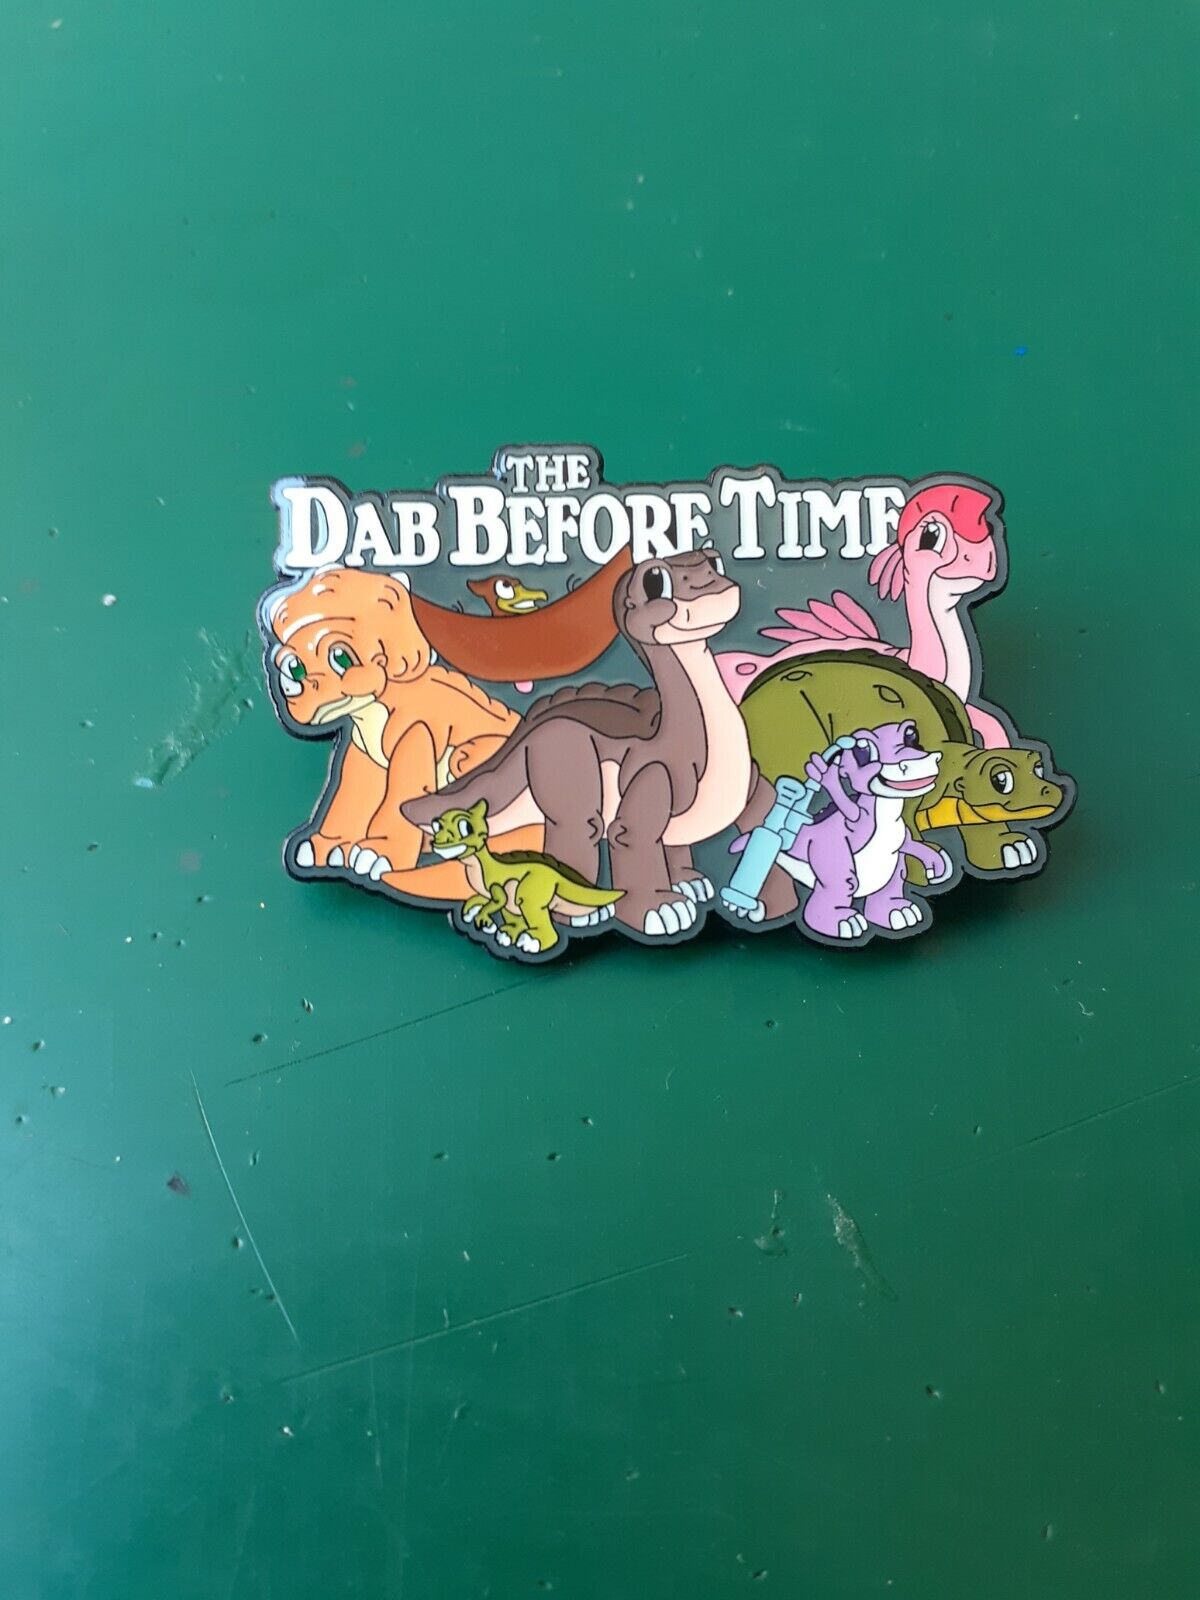 The land before time dinosaurs dab enamel lapel hat pin badge littlefoot petrie